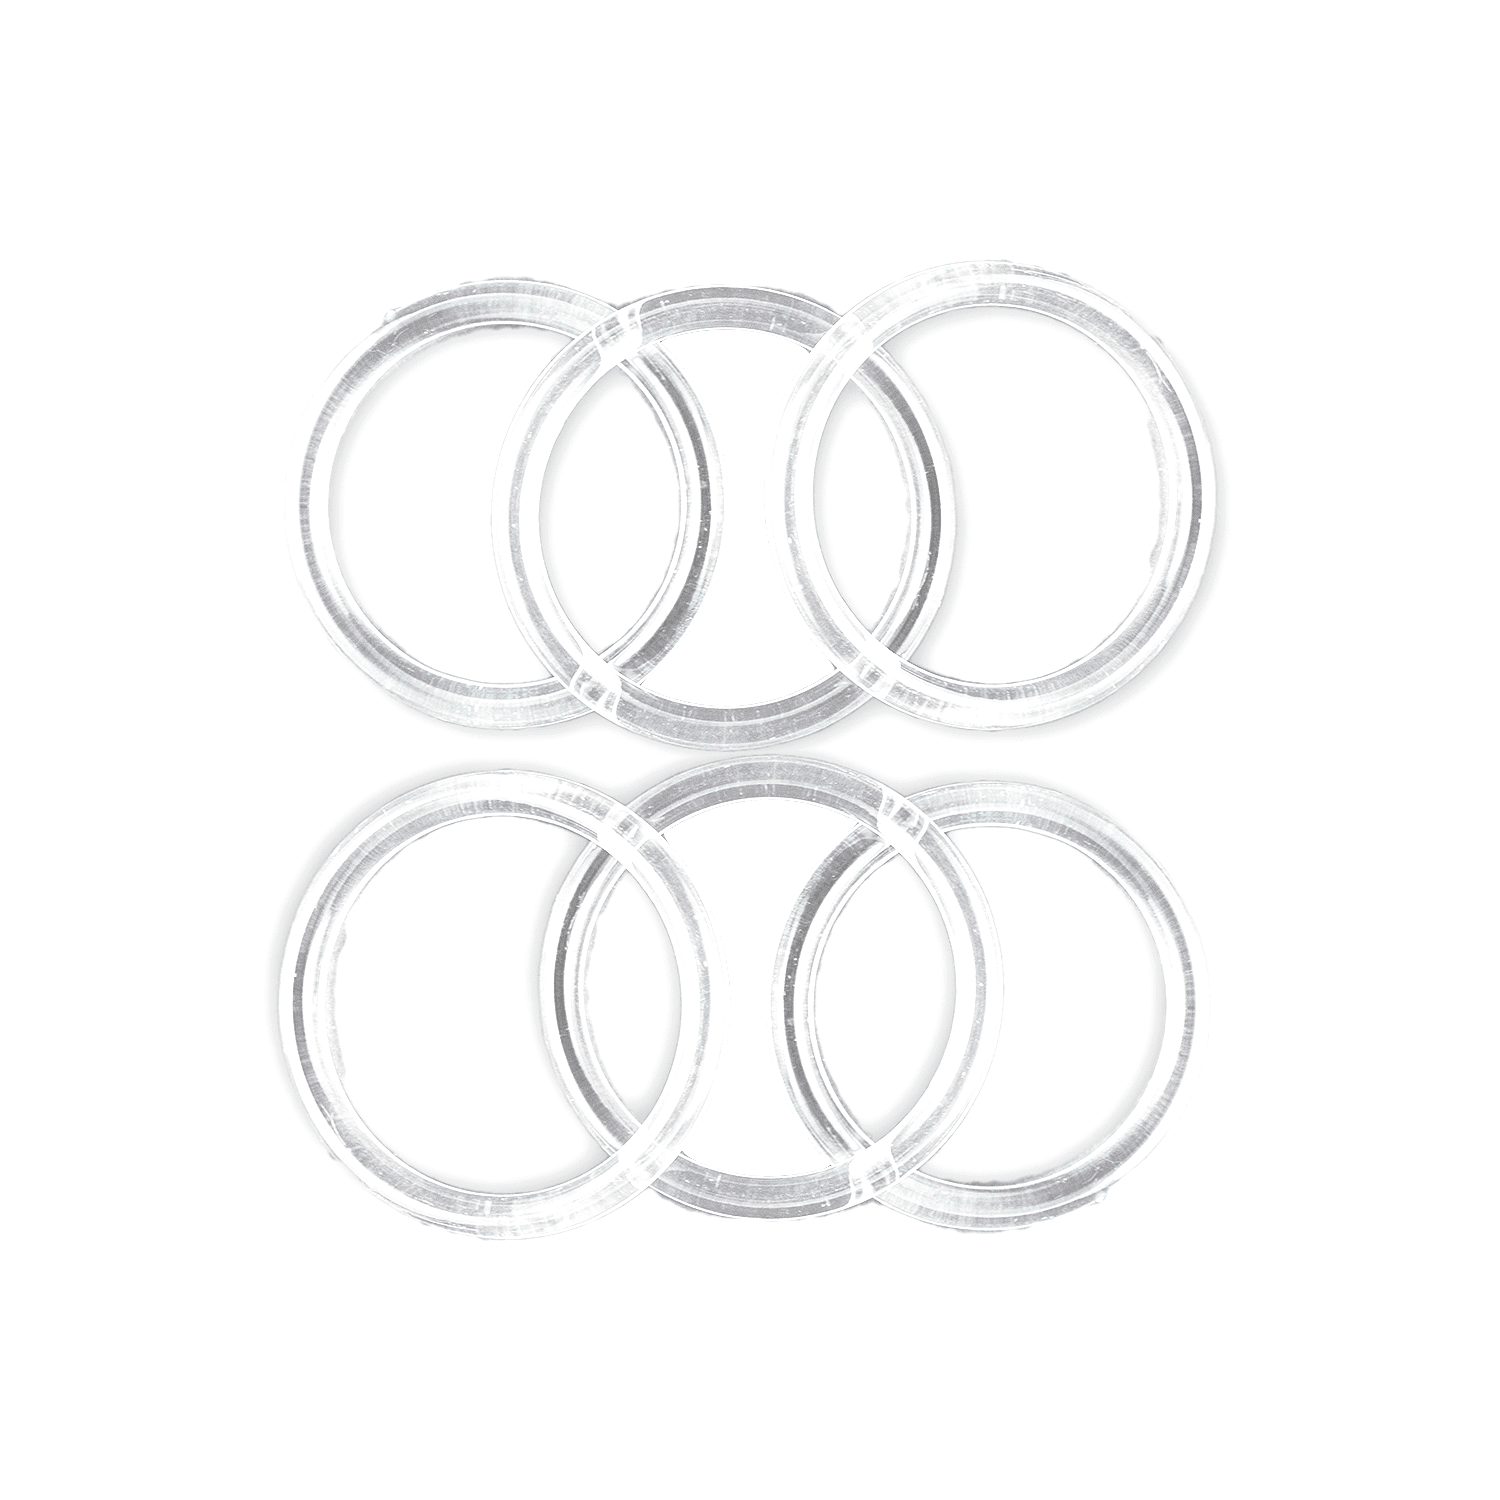 Plastic Acrylic Craft Rings (Pack of 6) Choose Color & Size 1.75, 3, 4  or 5